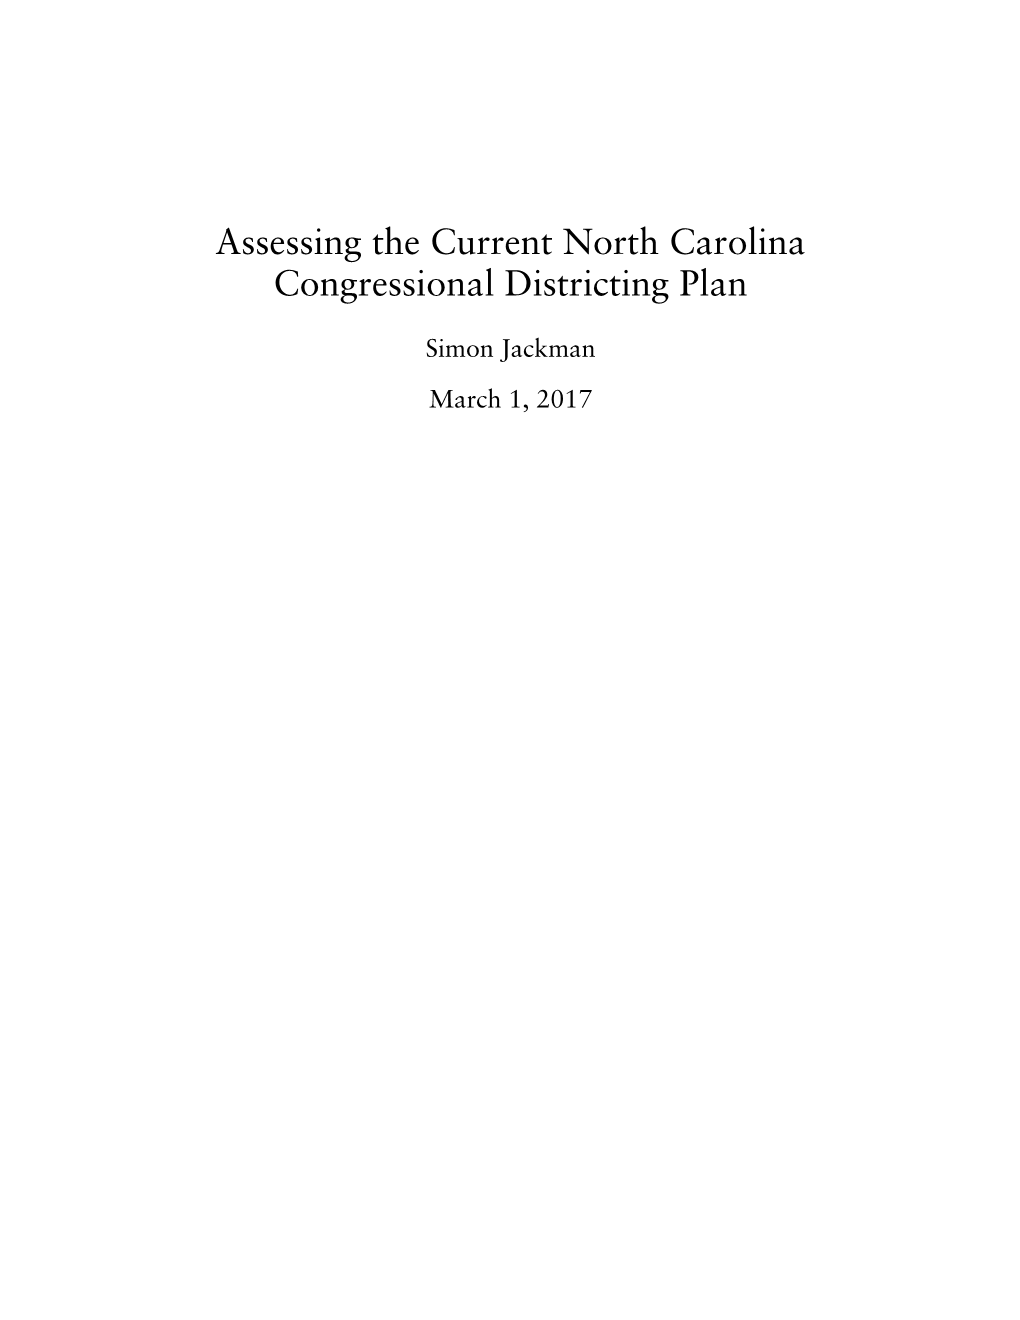 Assessing the Current North Carolina Congressional Districting Plan